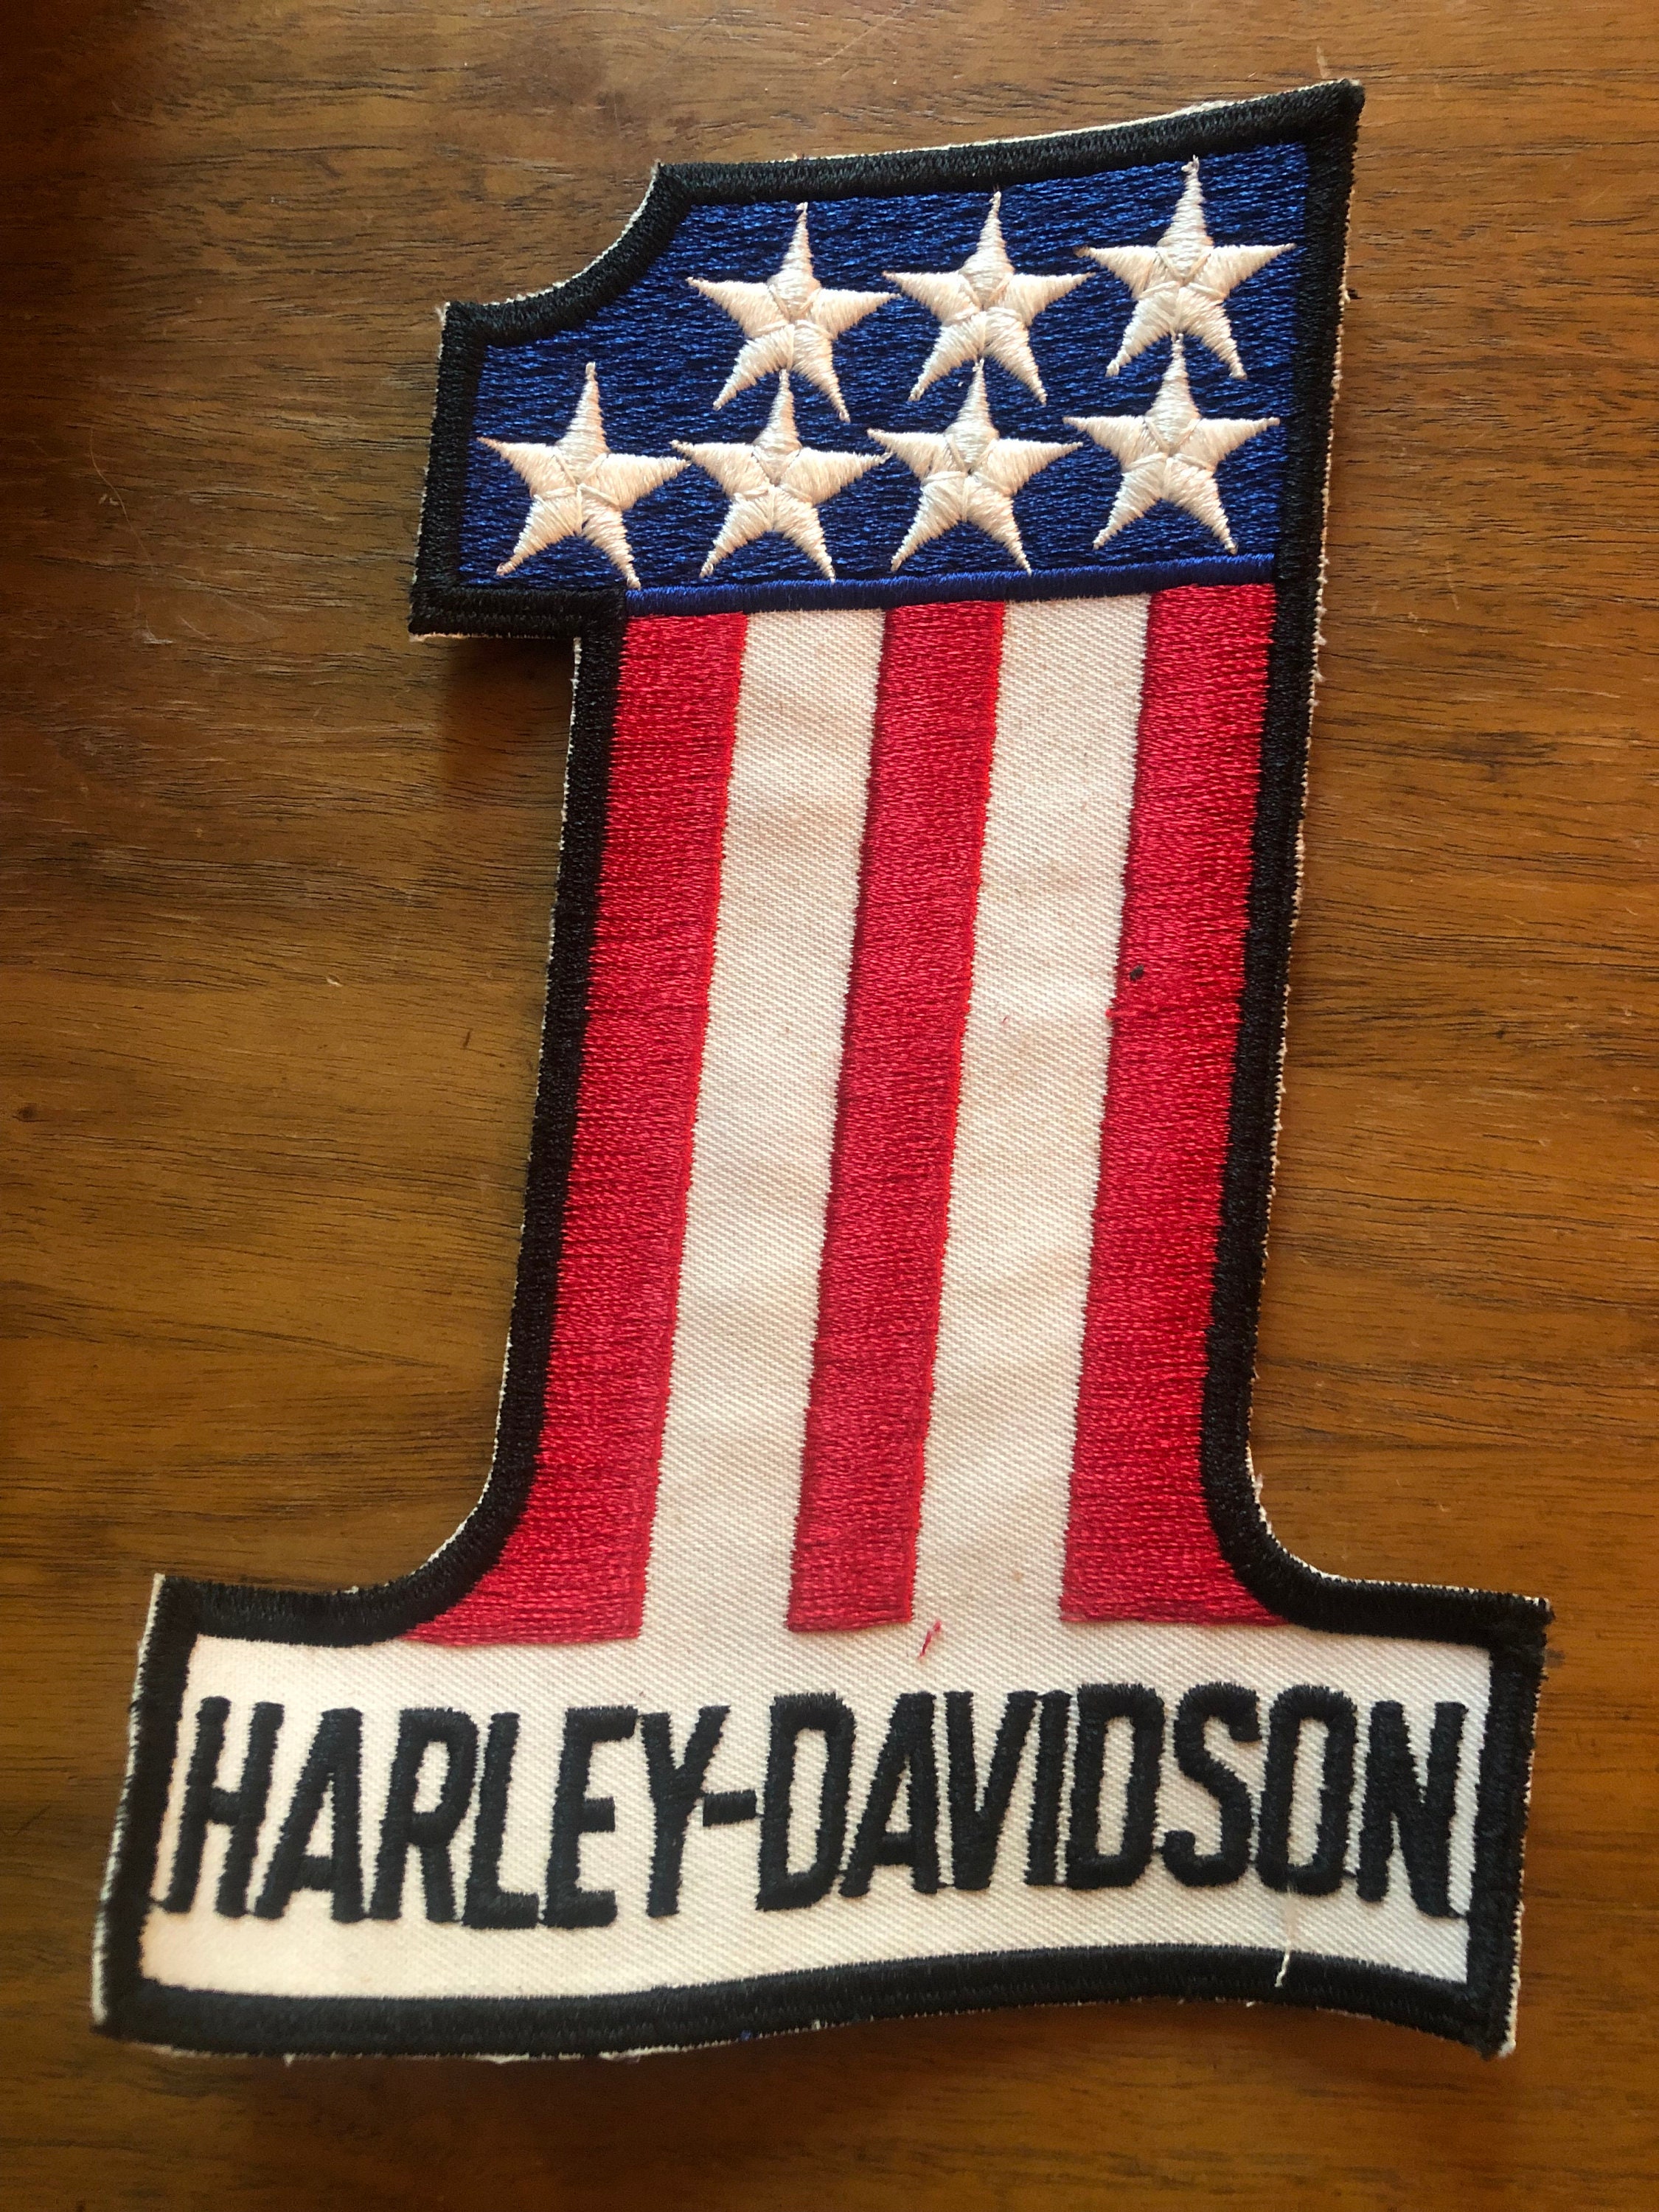 Harley Davidson Patch, Harley Davidson Shield, 4x3 Patch With  Thermohaderible Iron-on Patch Ready to Be Easily Glued or Sewn 